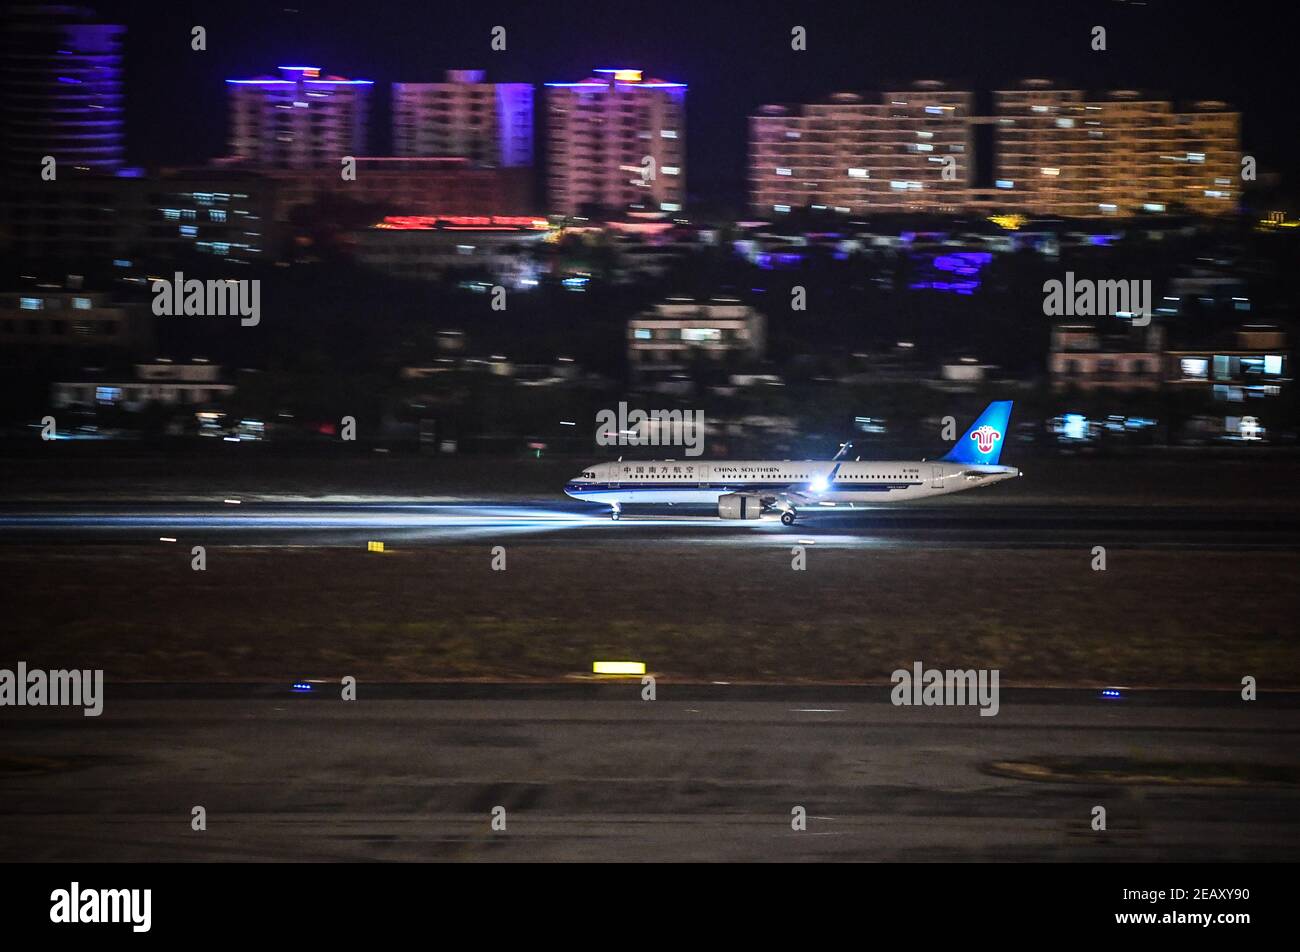 (210211) -- SANYA, Feb. 11, 2021 (Xinhua) -- A plane touches down at the Phoenix International Airport under the guidance of Hong Yuan and his colleagues in Sanya, south China's Hainan Province, Jan. 27, 2021. Hong Yuan, 29, is an air traffic controller at Sanya Air Traffic Control Tower. As an air traffic controller, Hong is responsible for navigating the air traffic, guiding pilots during takeoff and landing, and monitoring the planes as they travel through the skies. This job requires high attentiveness.    Staff members are accordingly supposed to take a break every two hours to recover fr Stock Photo